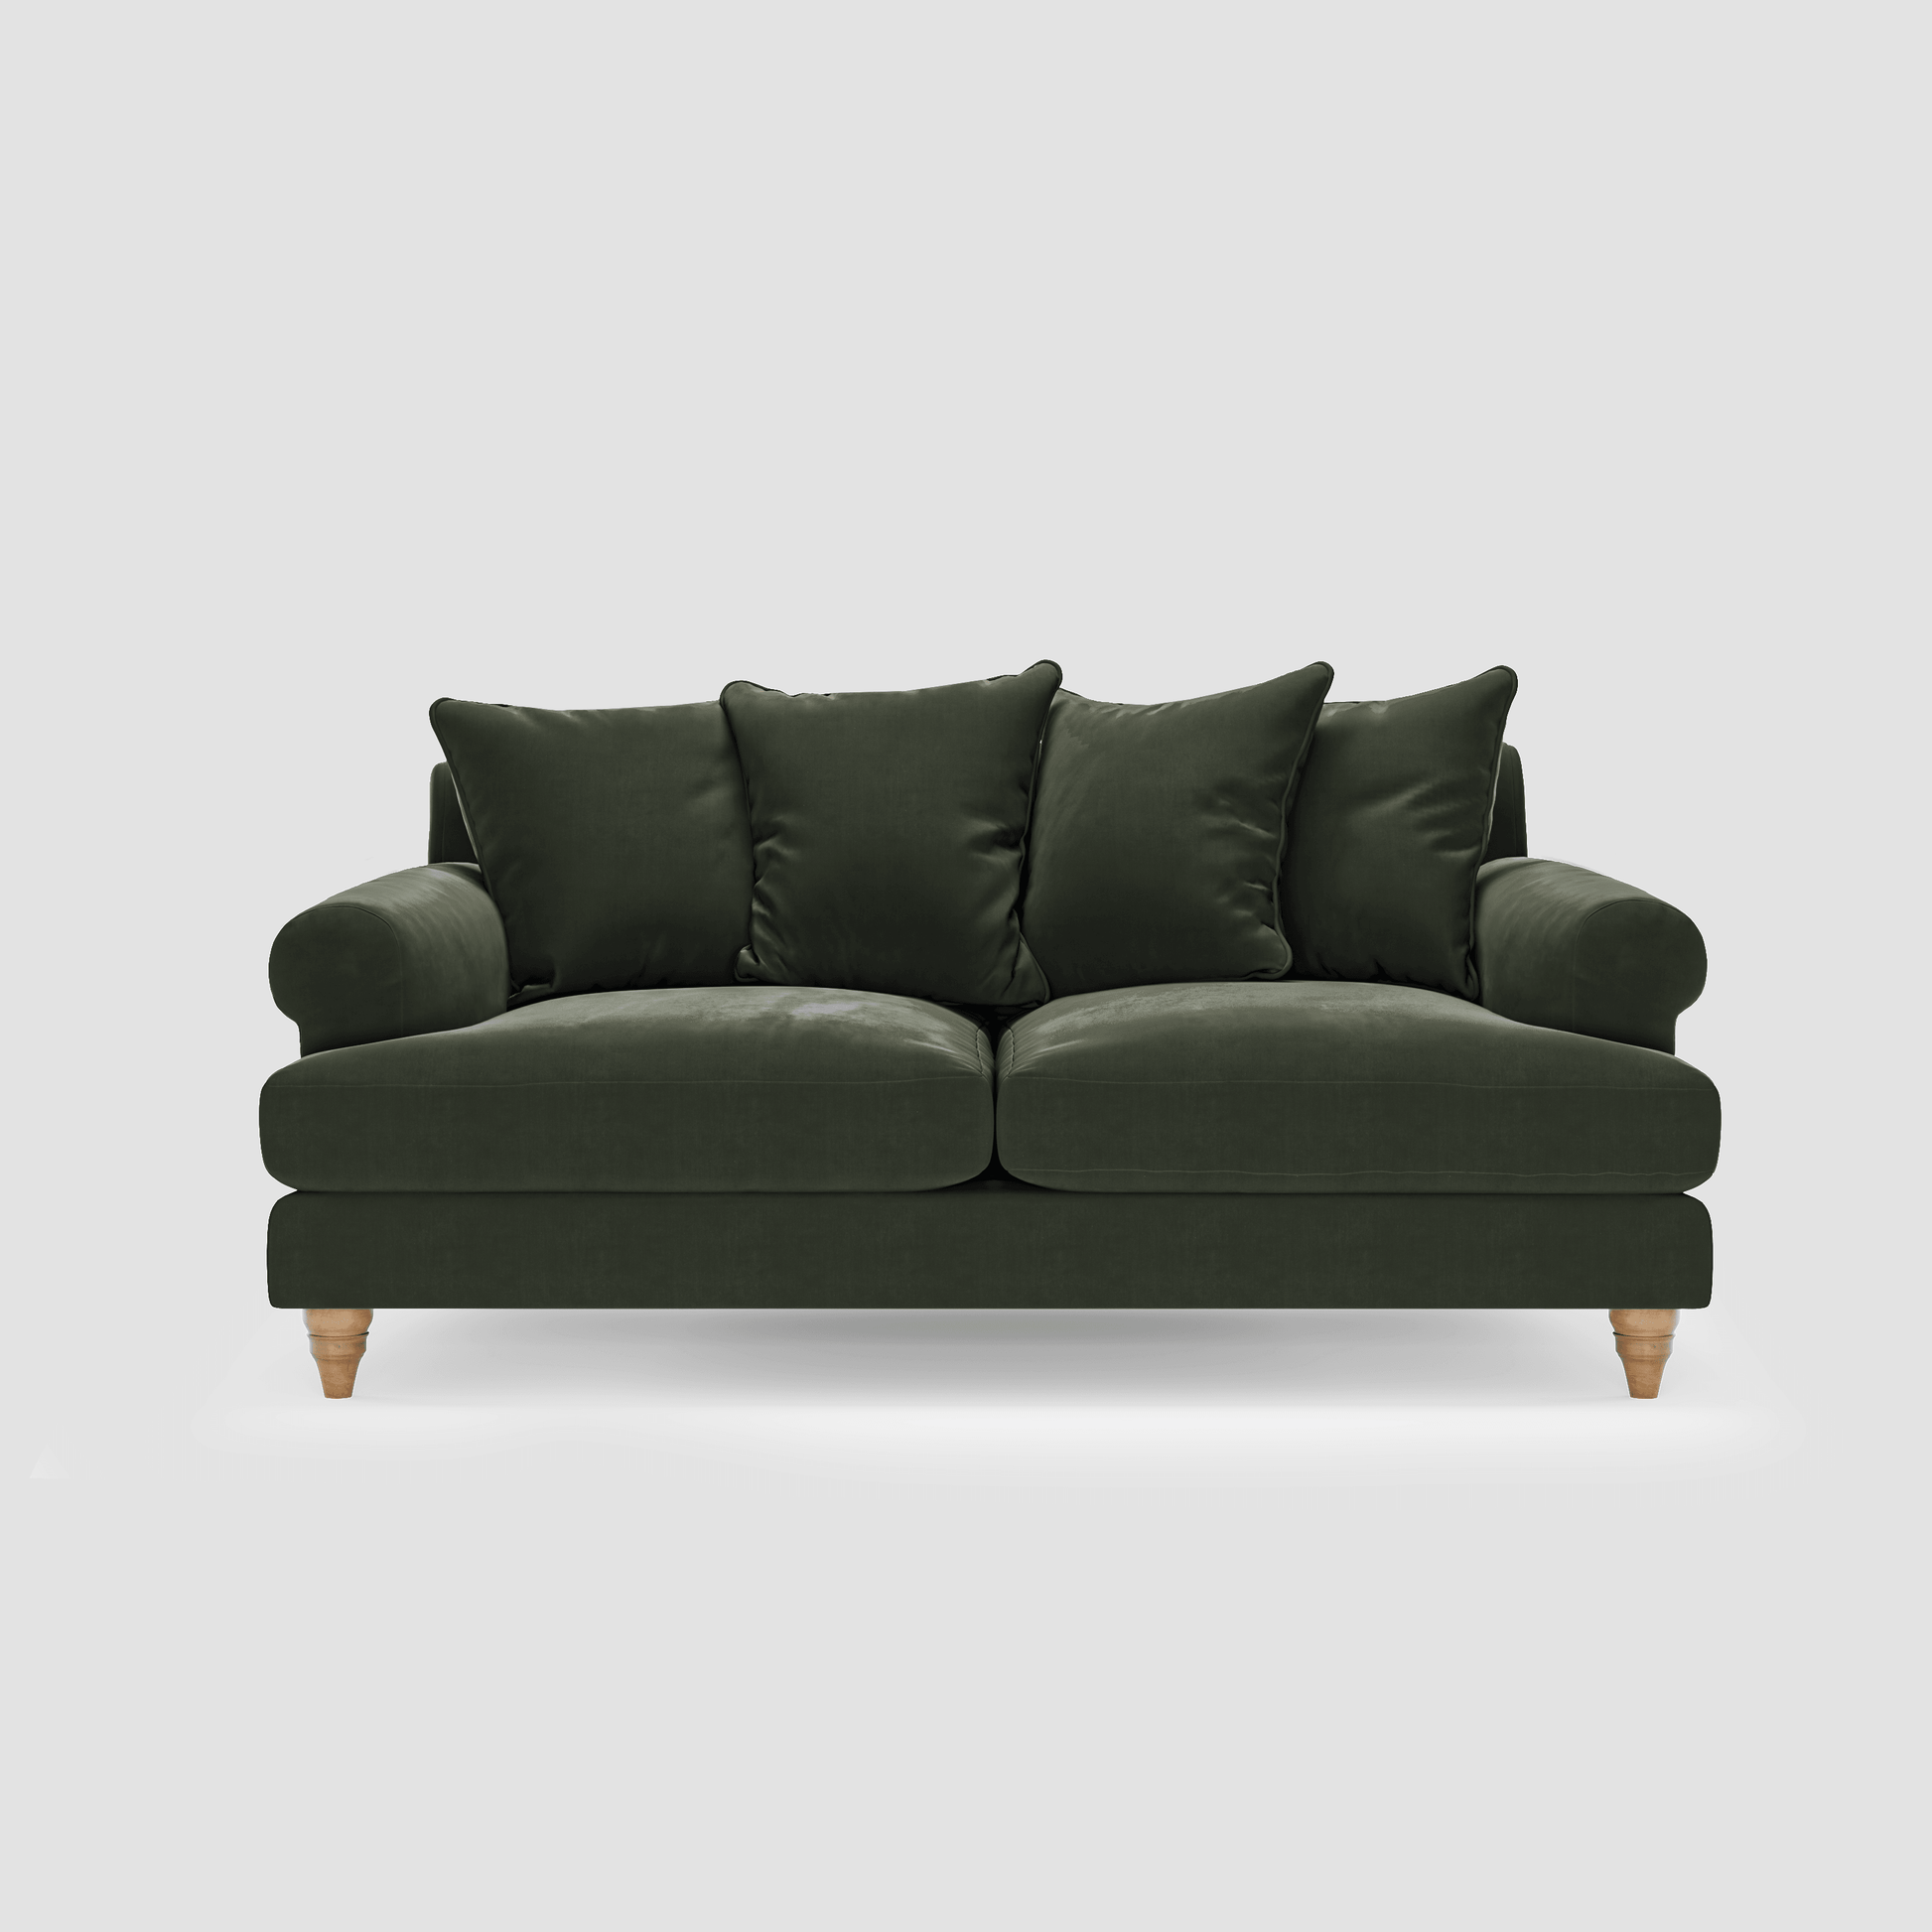 Fillis Two Seater Sofa - Flown the Coop